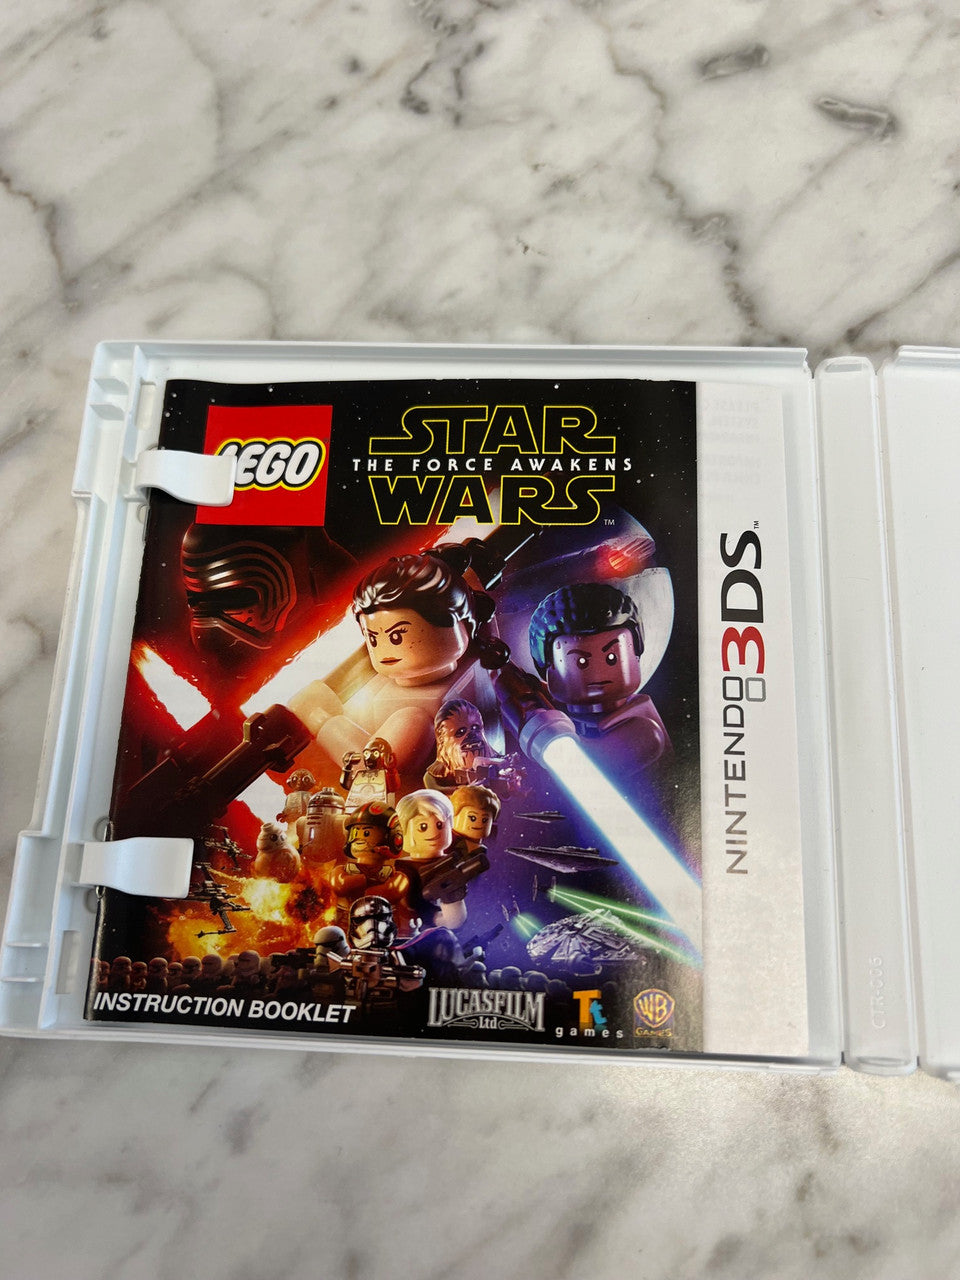 Lego Star Wars the Force Awakens Nintendo 3DS Case and Manual only